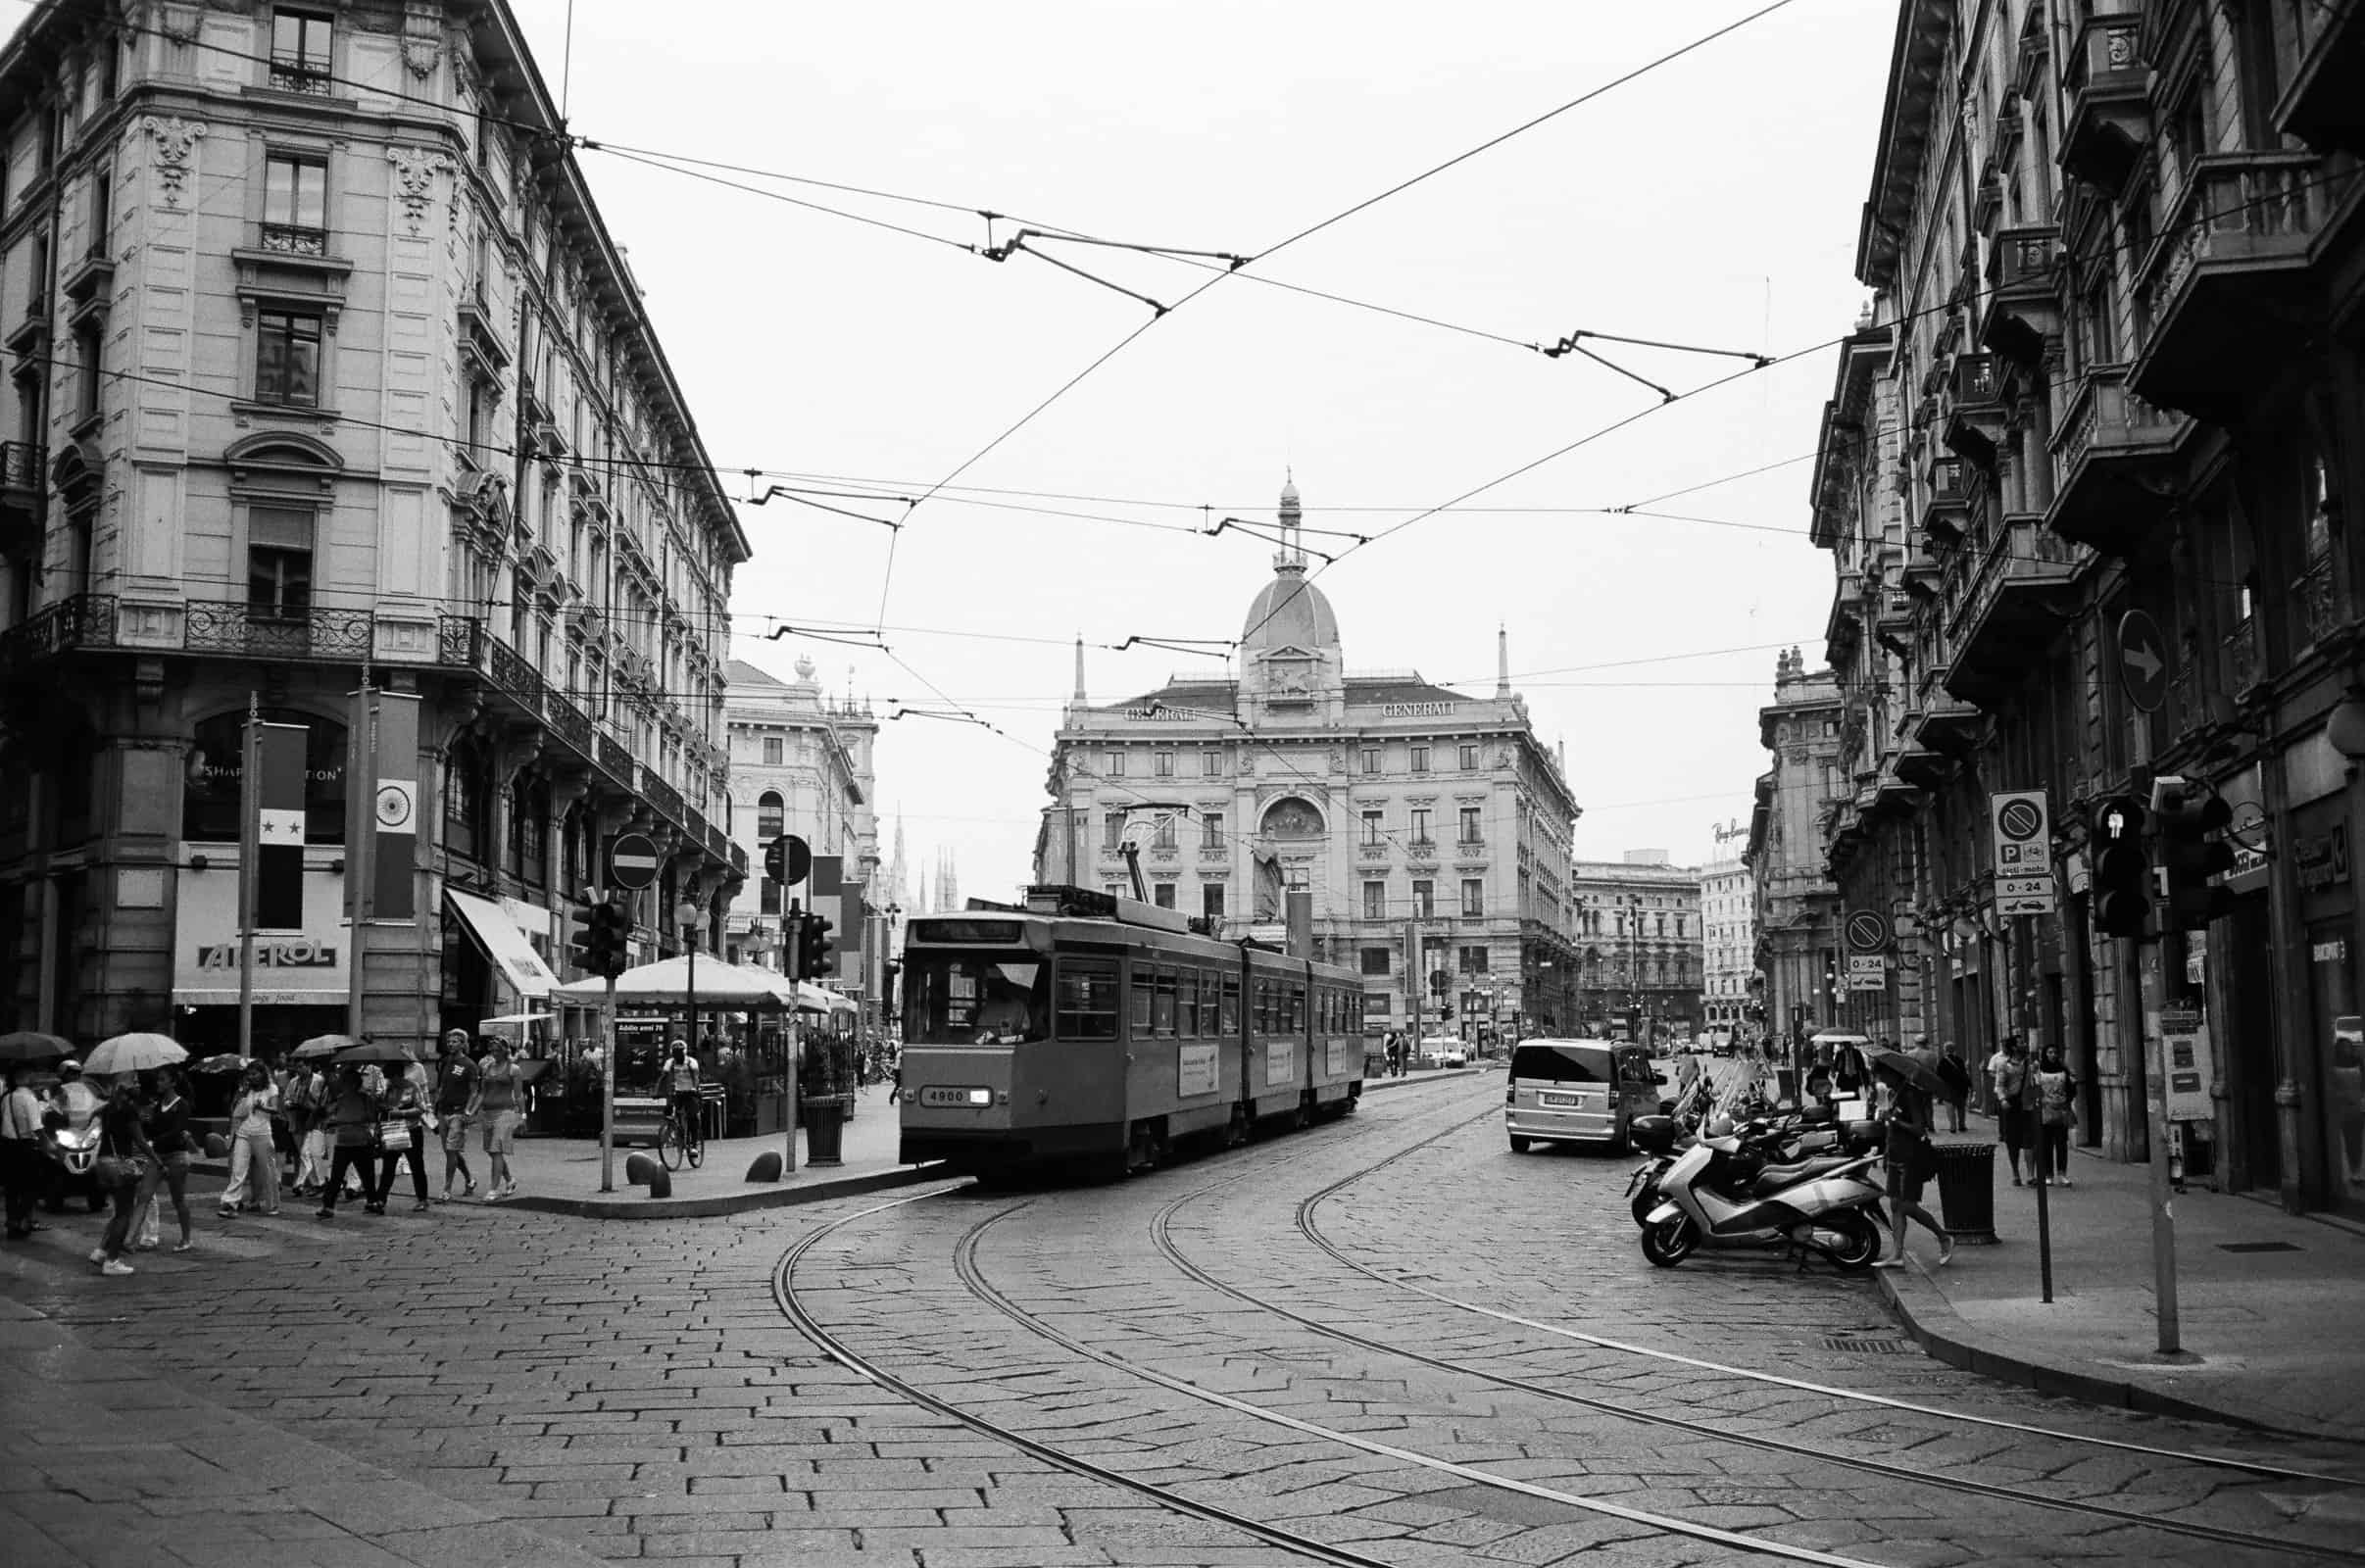 Tram and people walking in central Milan